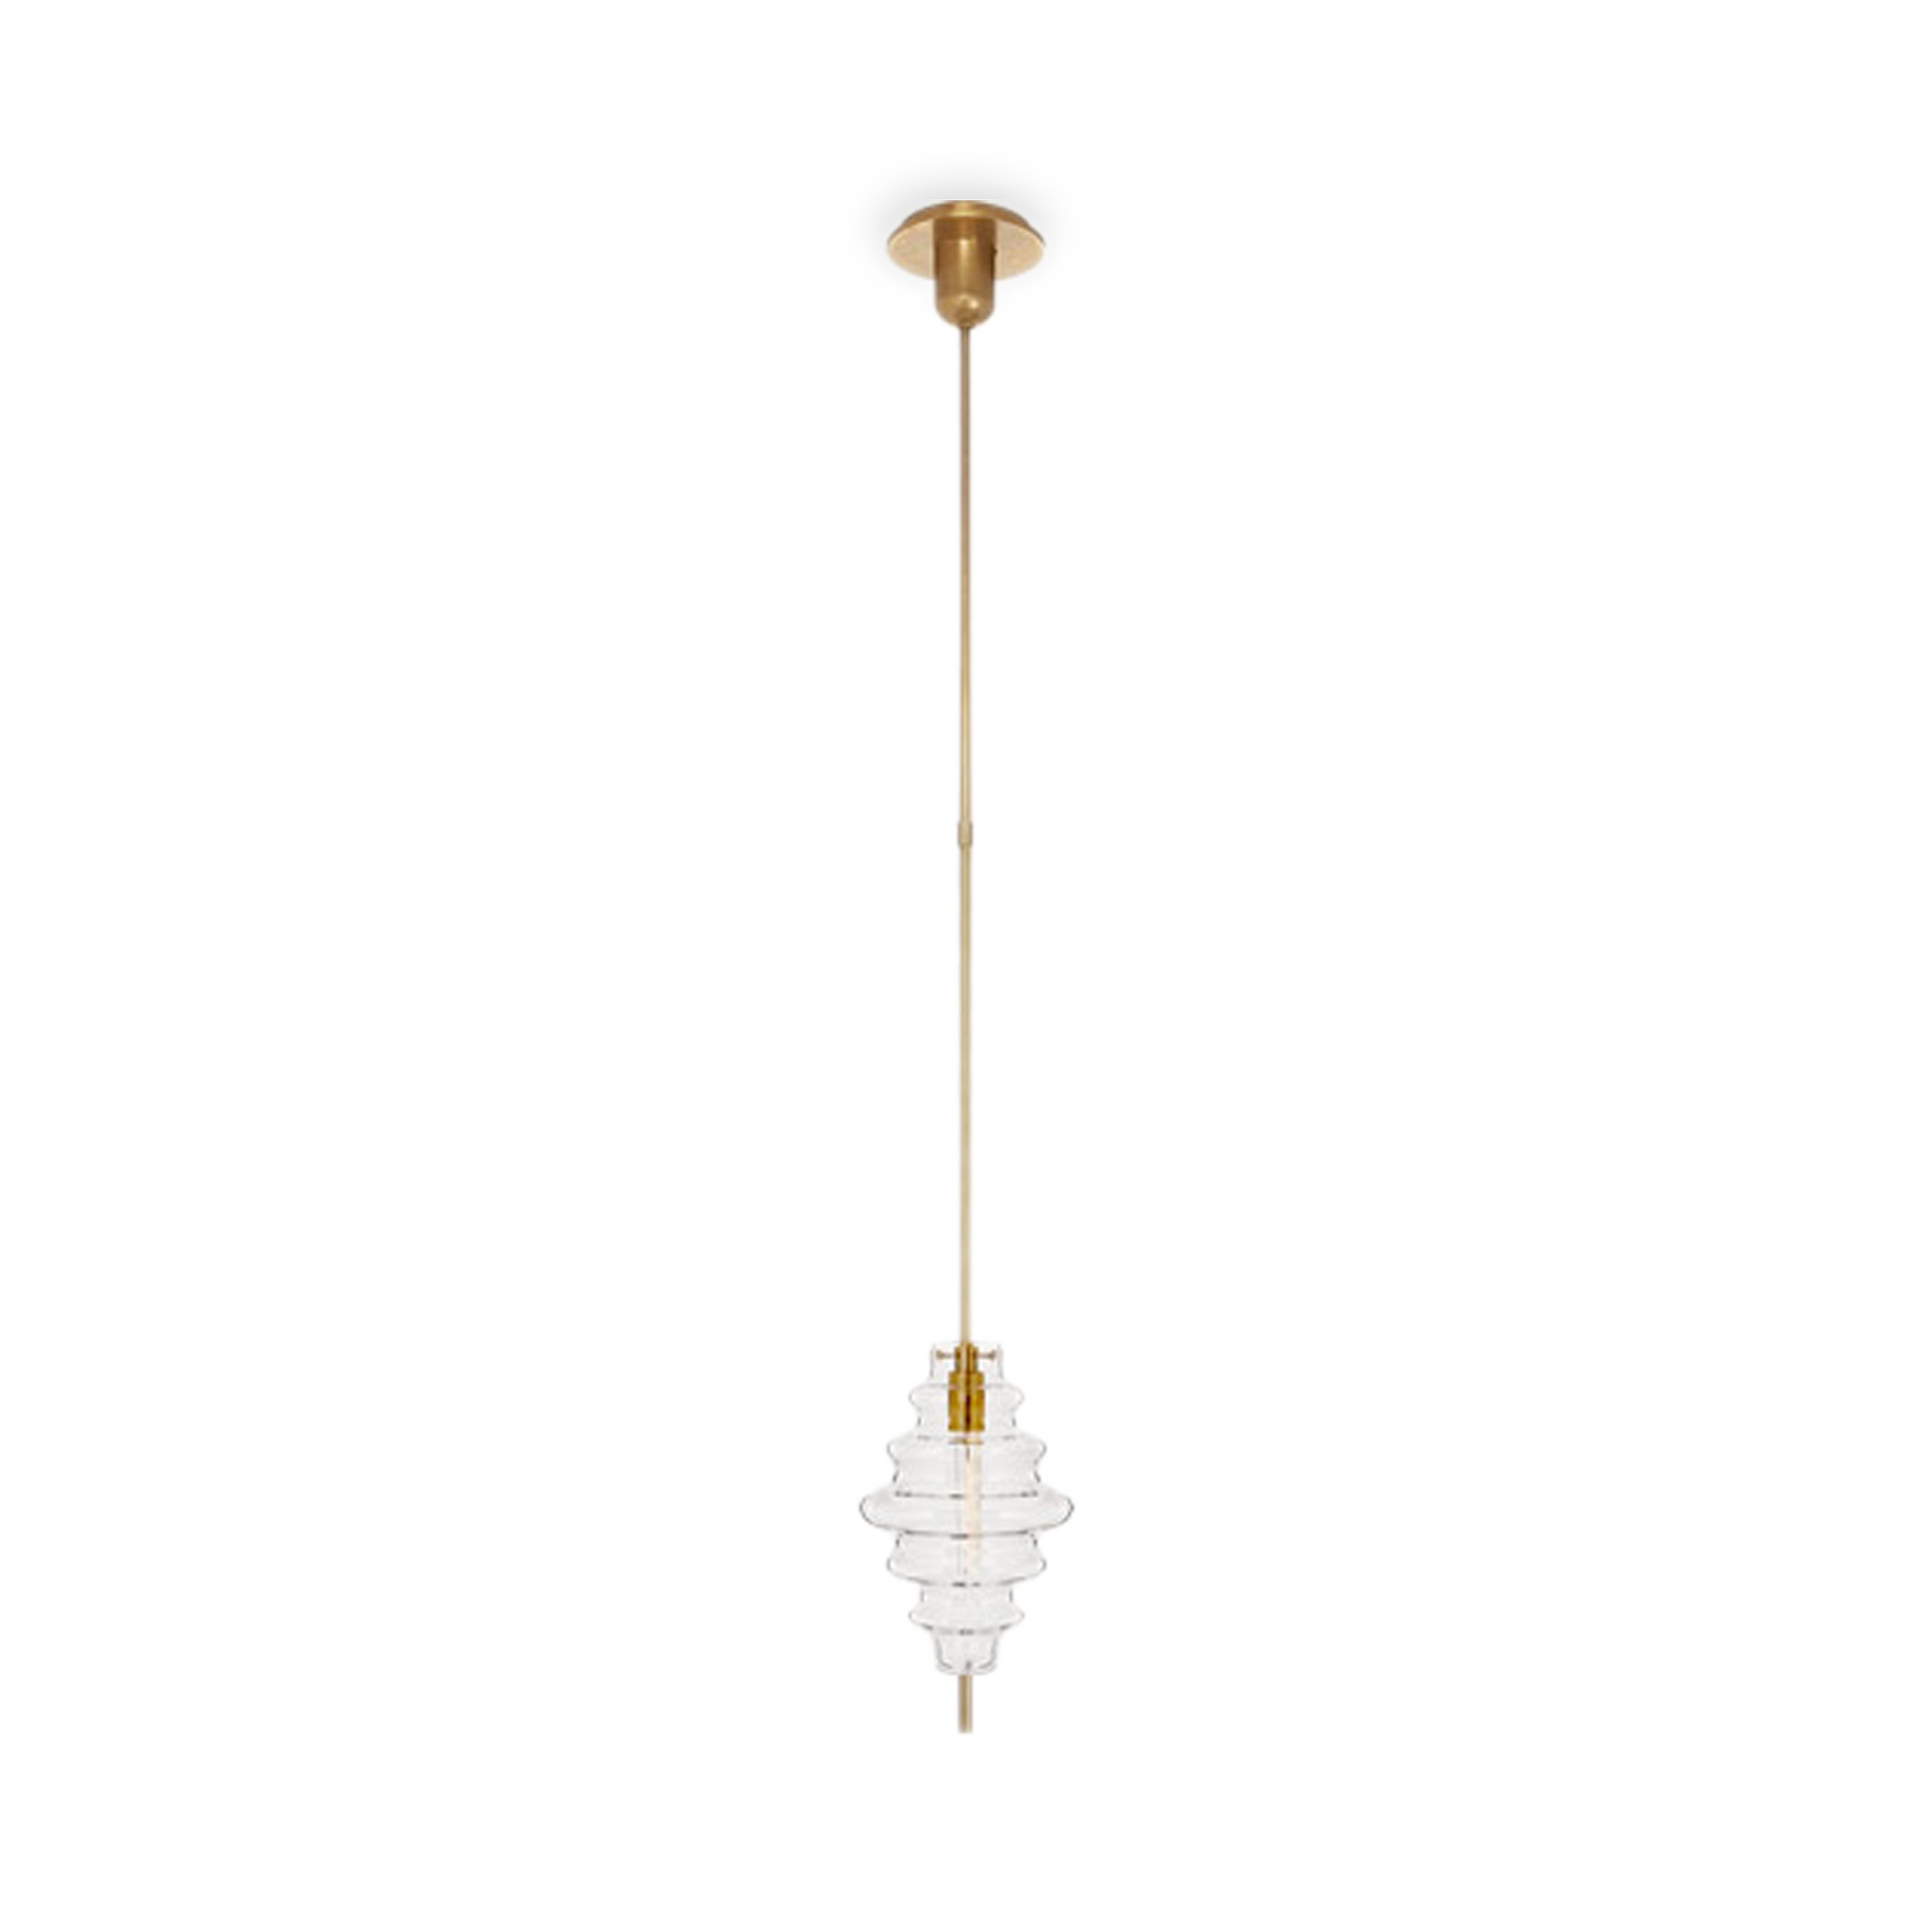 The Tableau Small Pendant features a distinctive design and  soulful vibe.